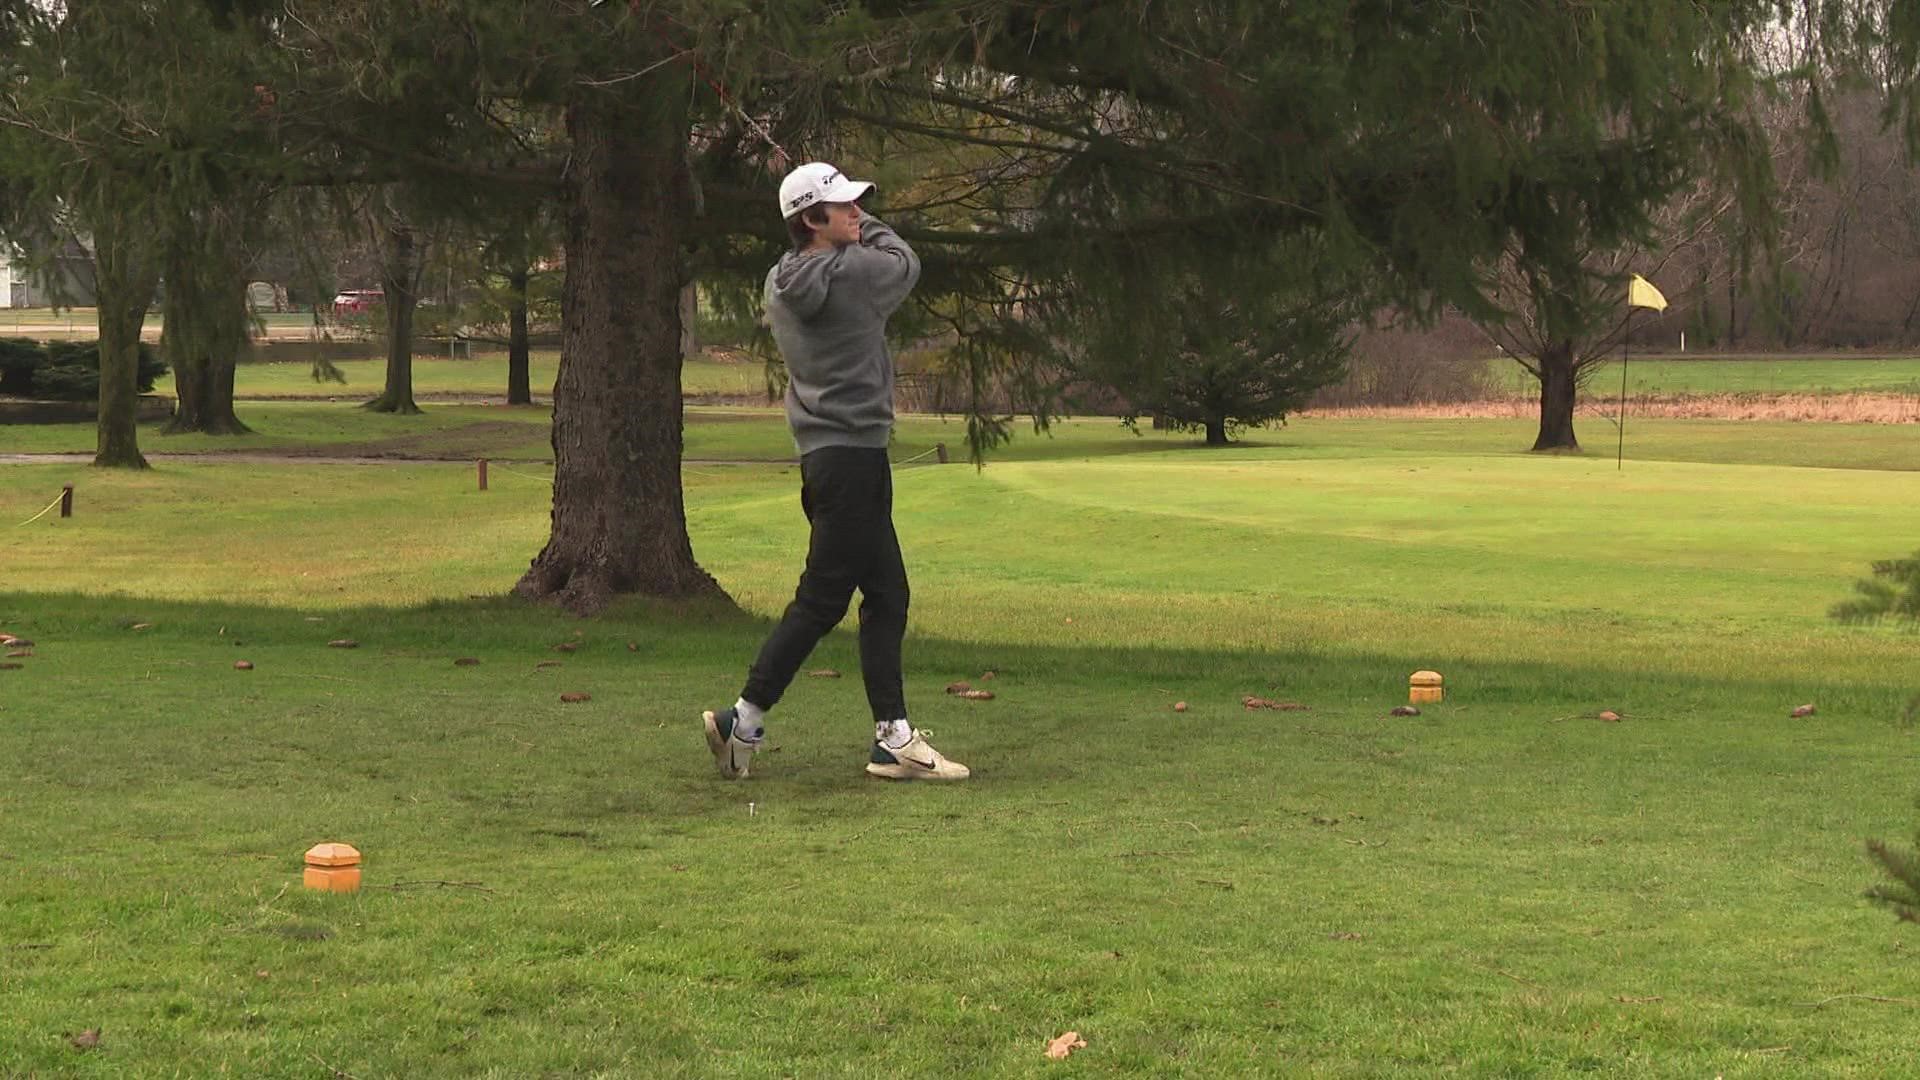 With temperatures in the high 50s and lost 60s ten days before Christmas, Michigan golfers decided to trade their cabin fever for a rare December day on the links.